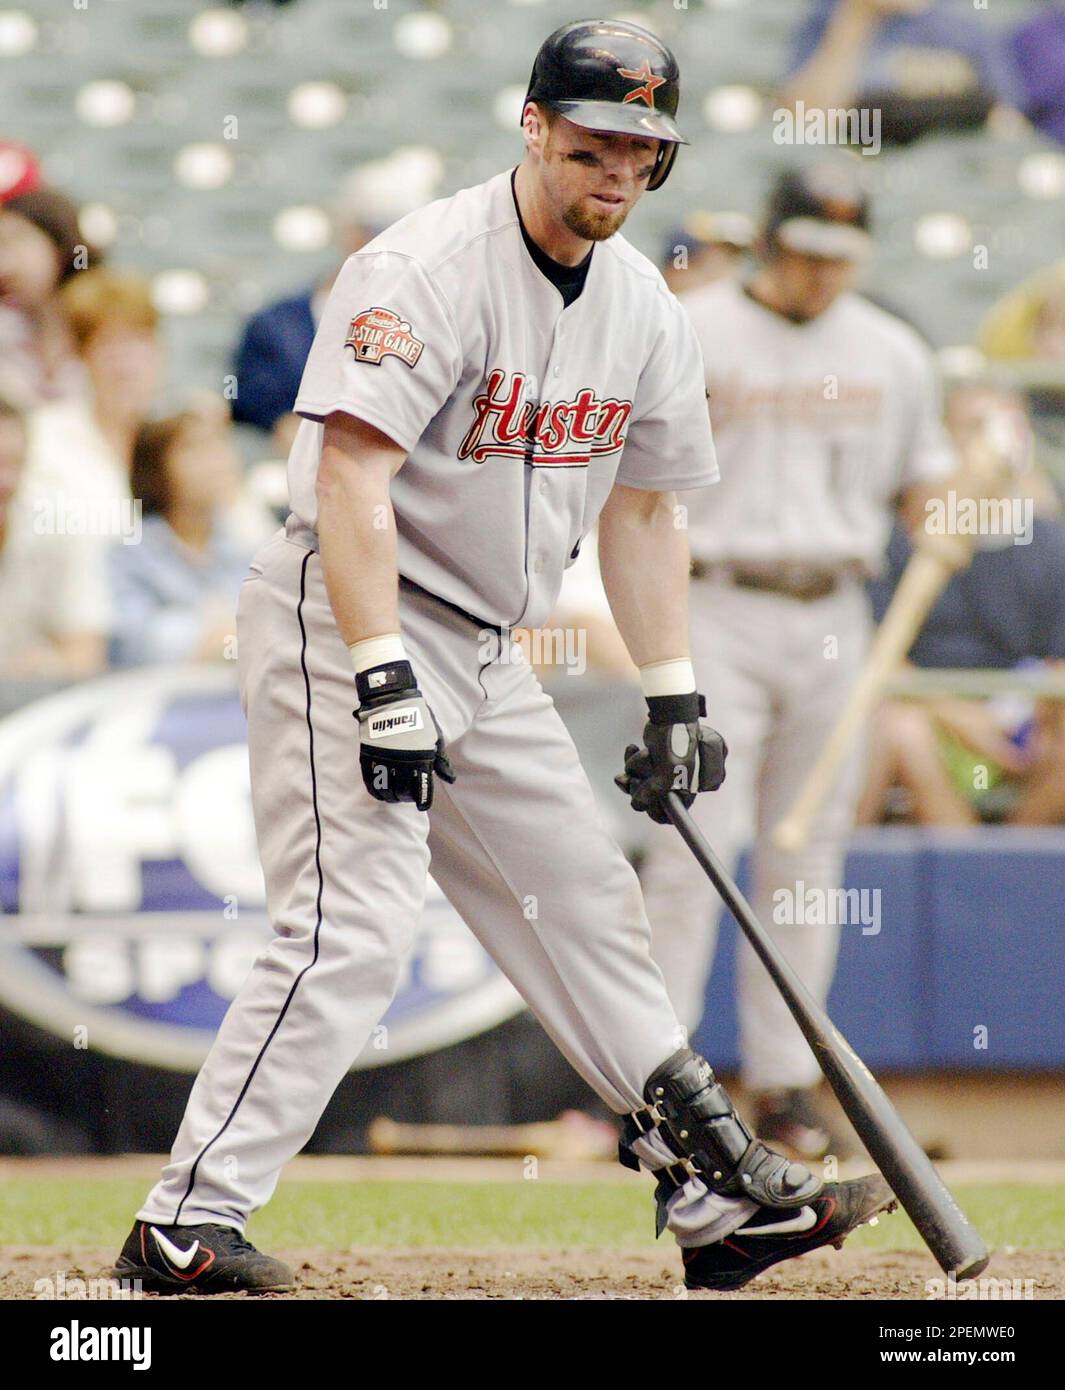 Jeff Bagwell of the Houston Astros during the game against the